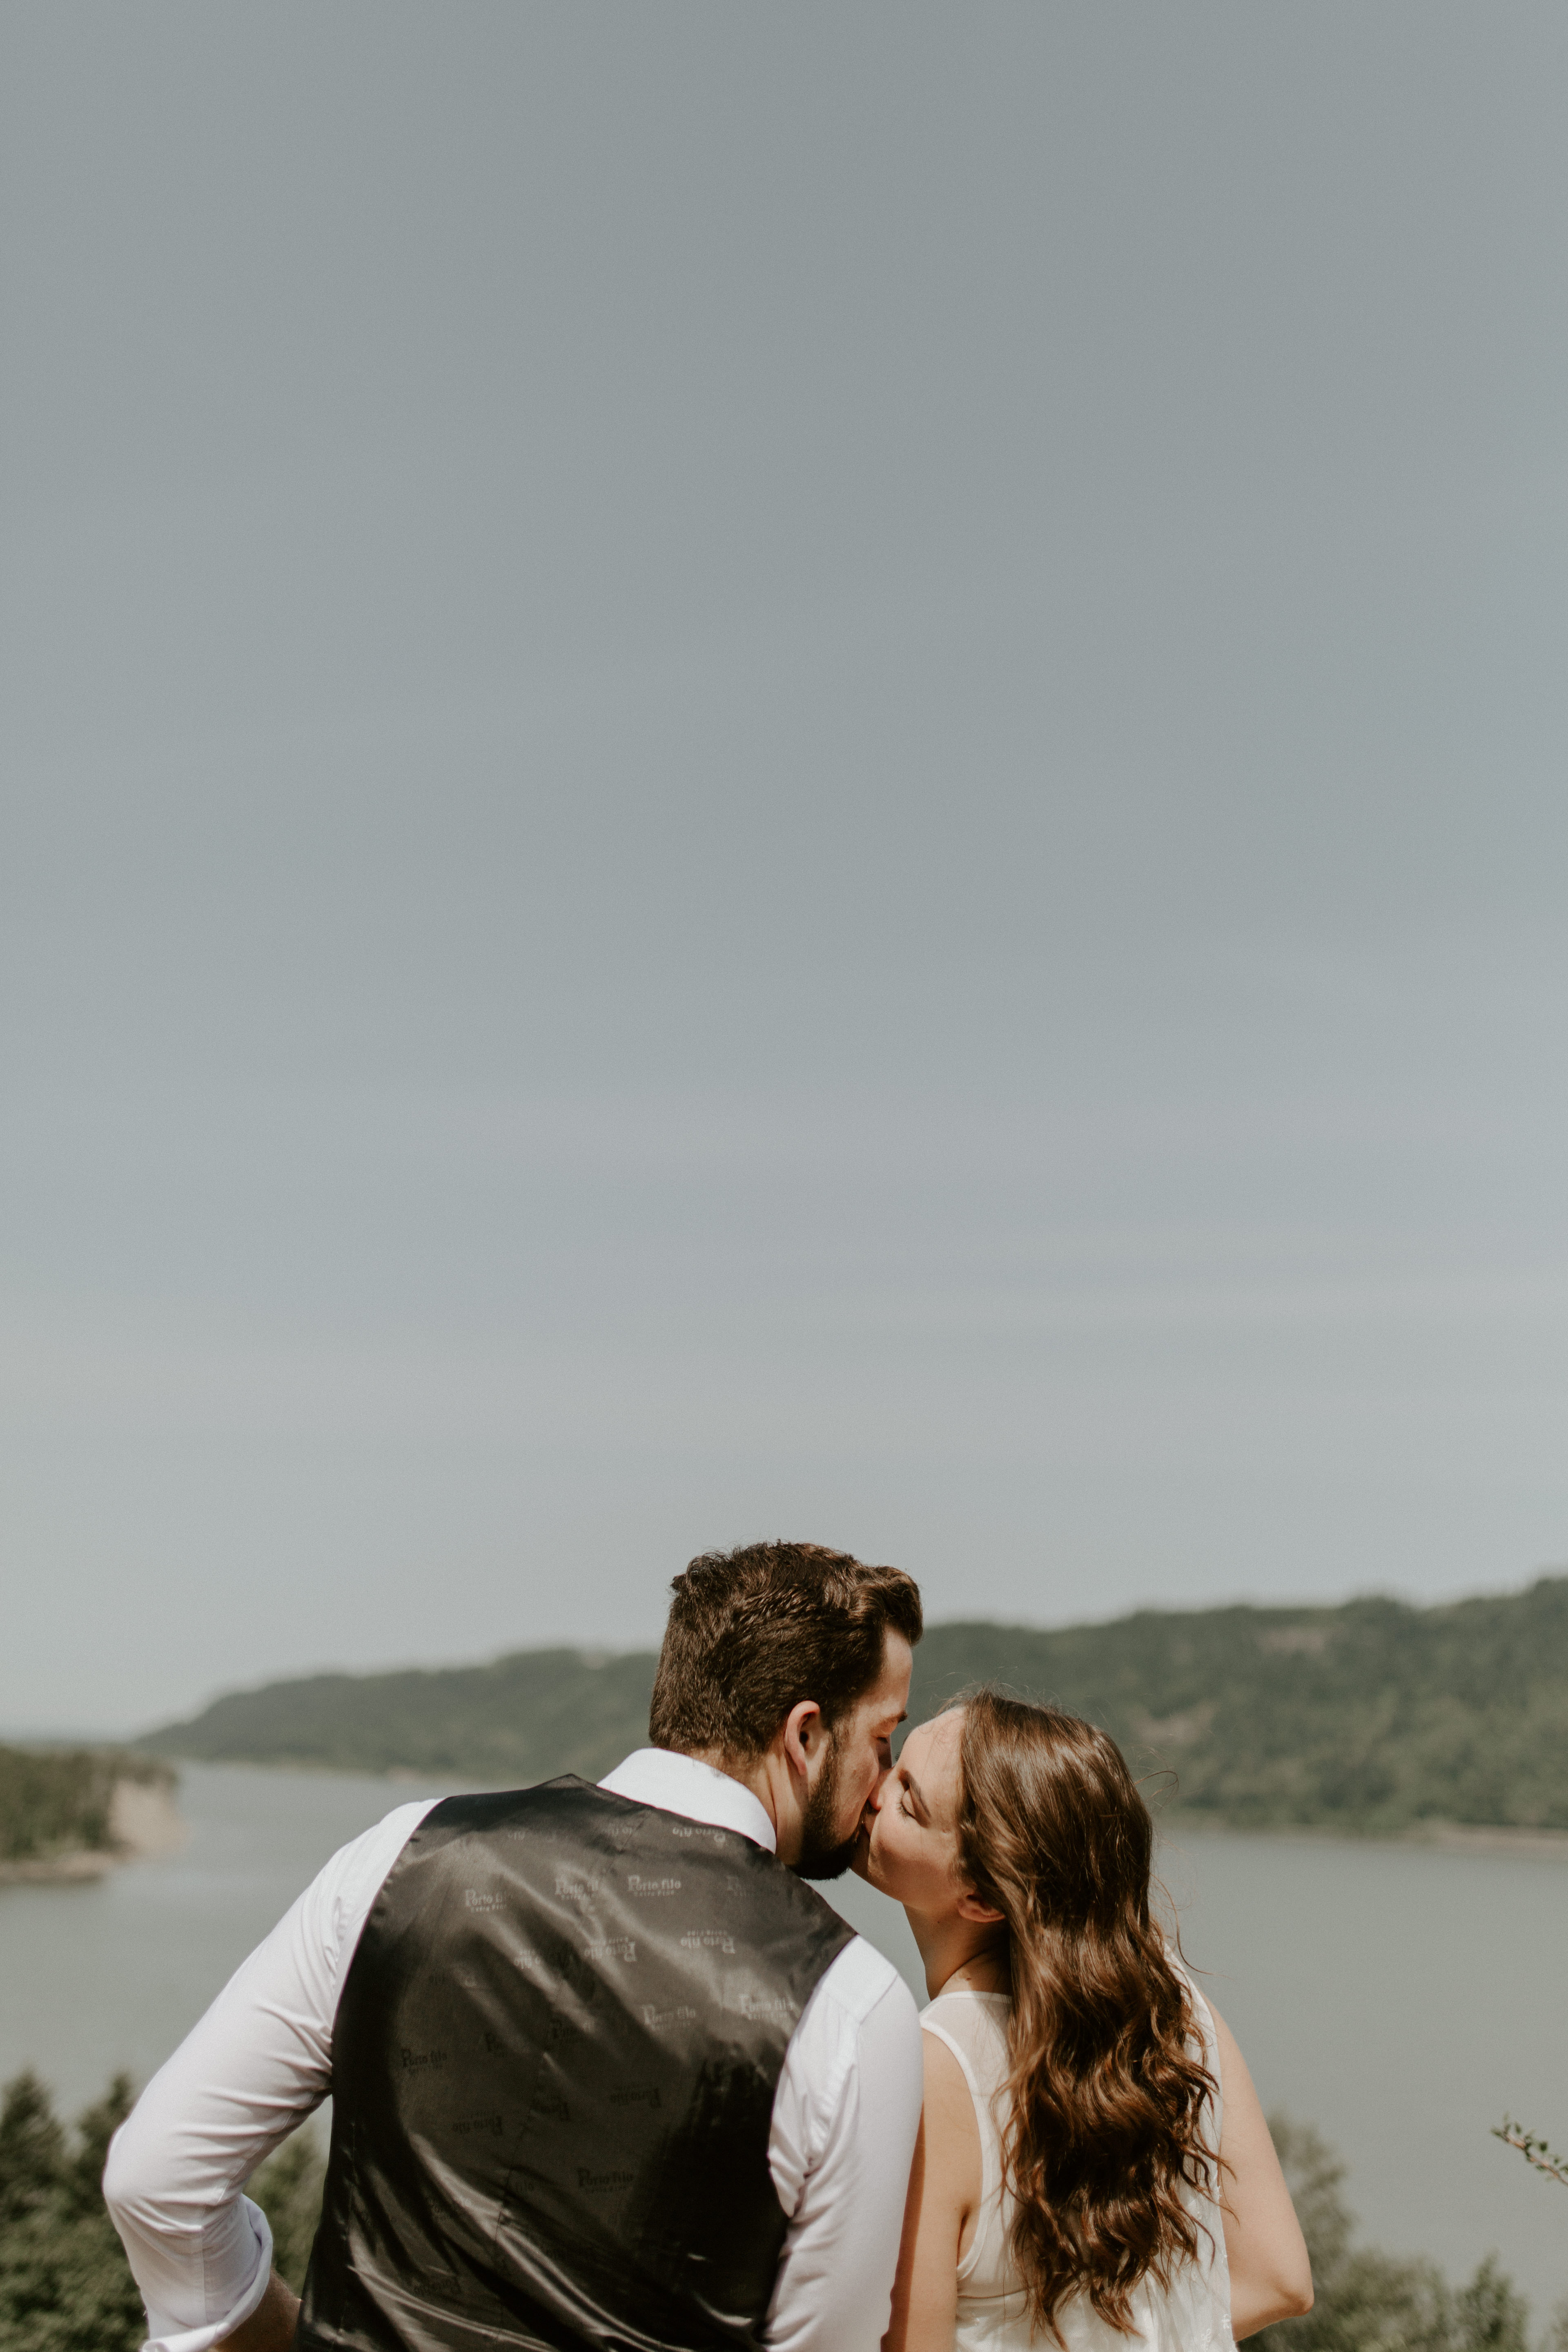 Emily and Josh kiss at Bridal Veil Falls, Oregon during their Oregon elopement. Elopement photography in Portland Oregon by Sienna Plus Josh.